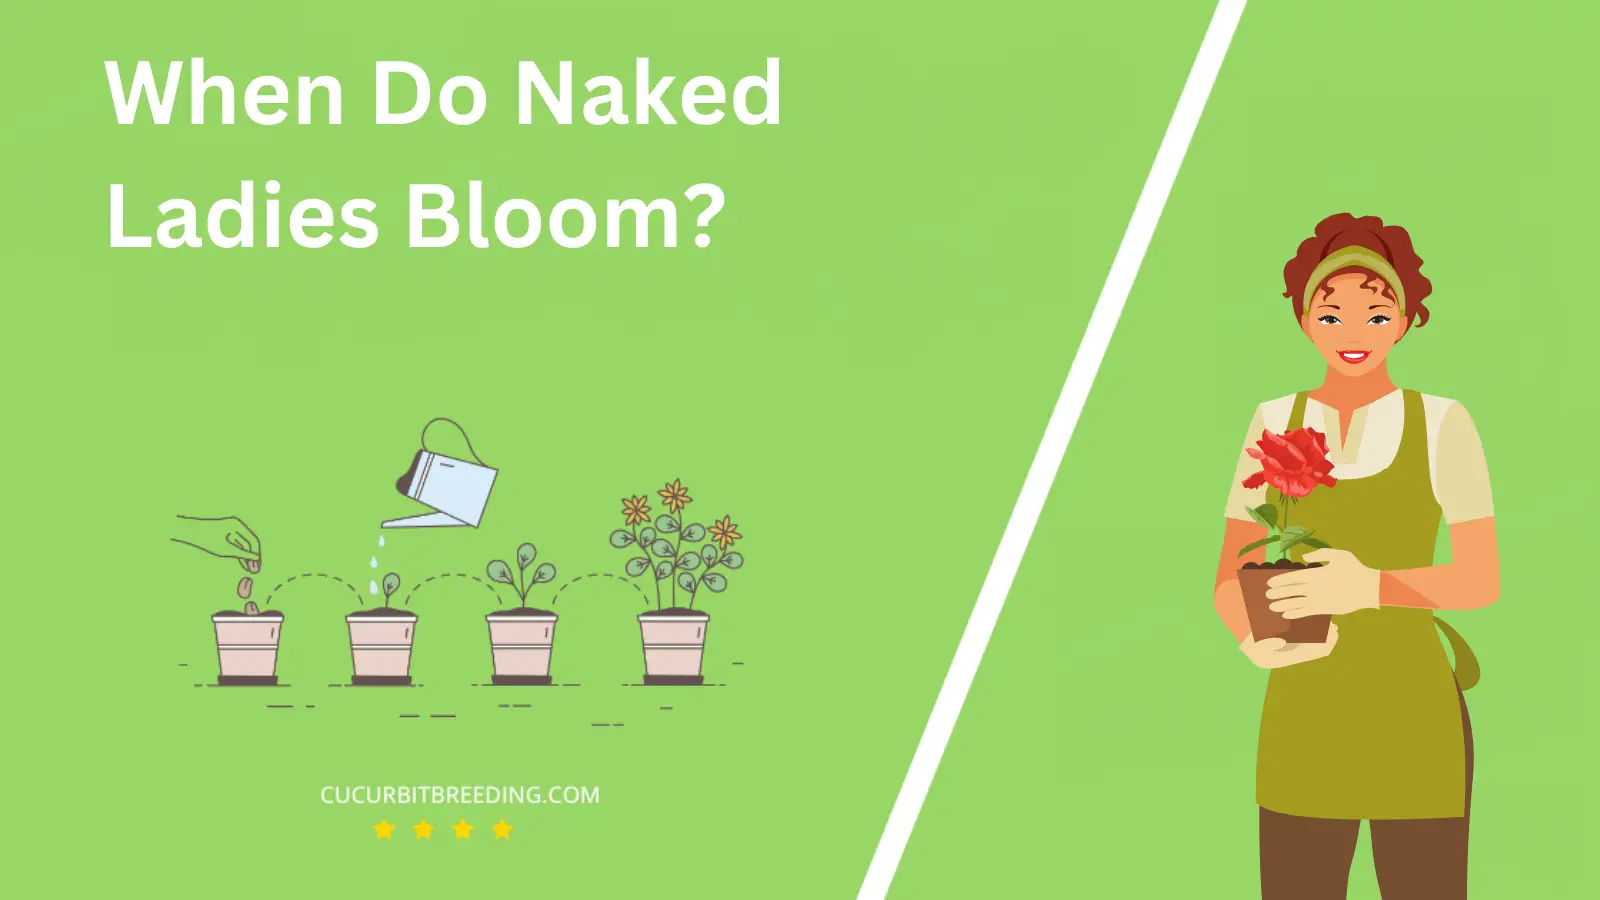 When Do Naked Ladies Bloom?